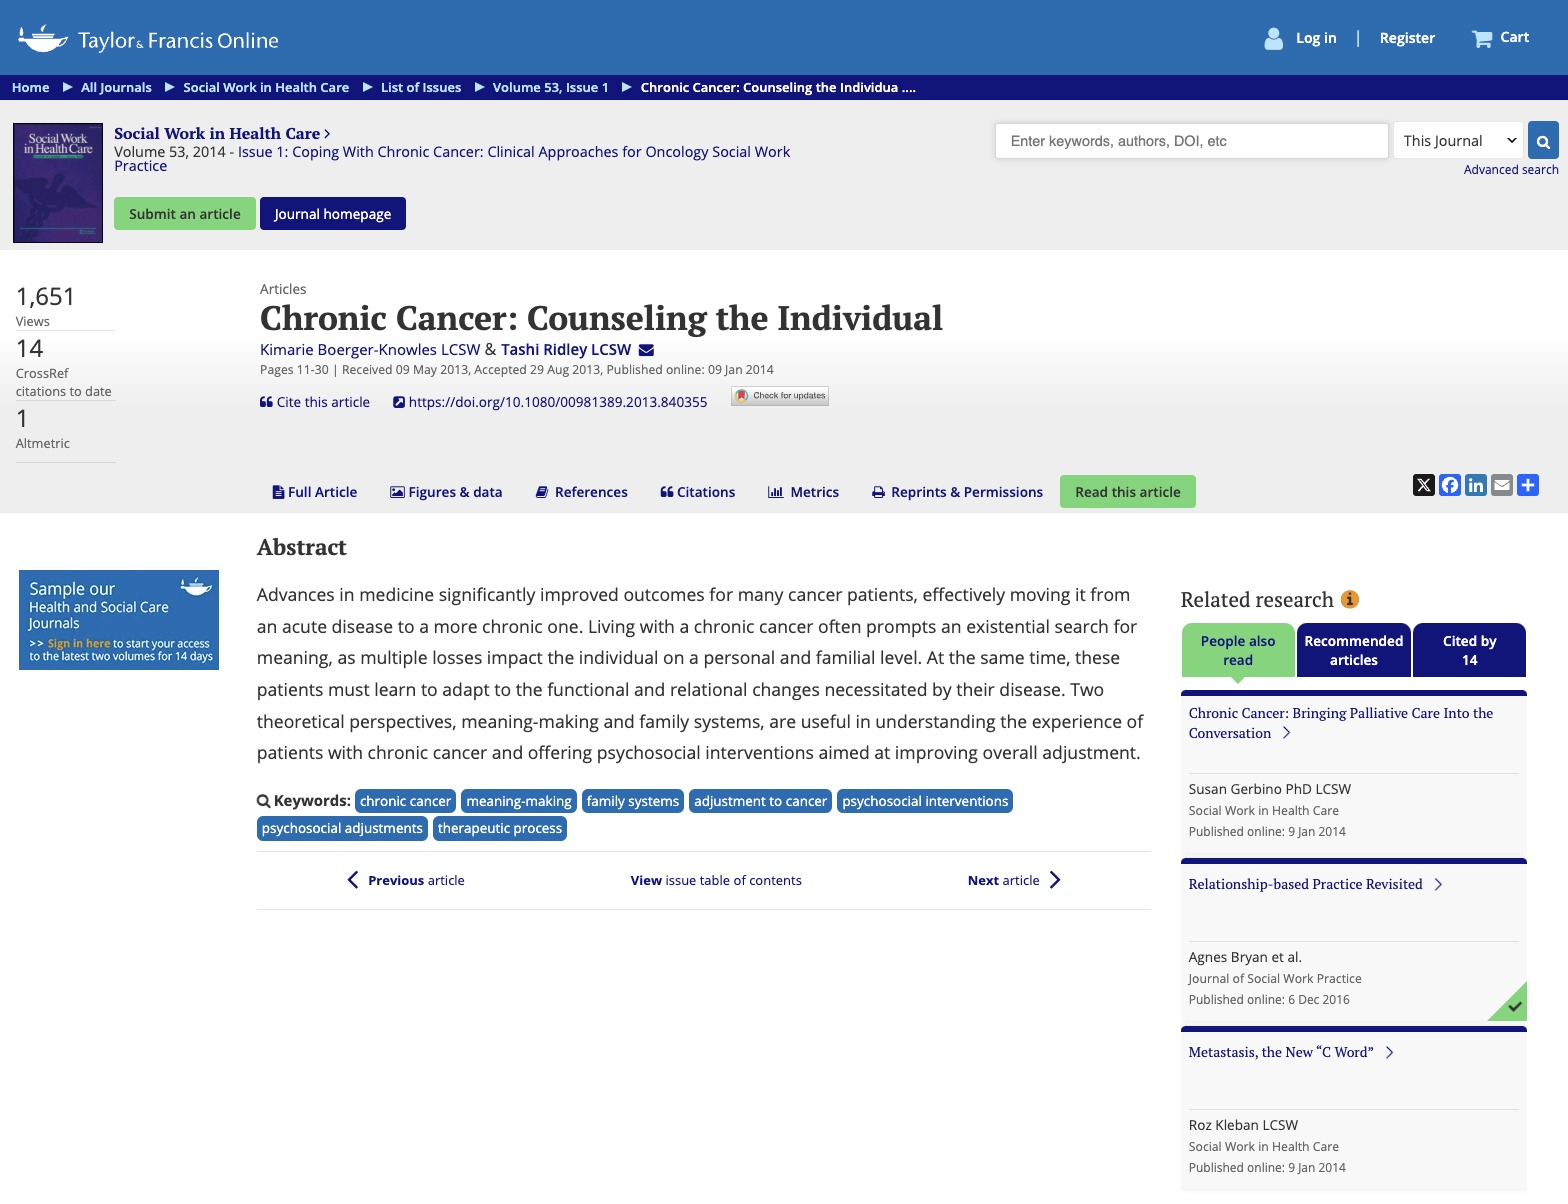 Chronic Cancer counseling